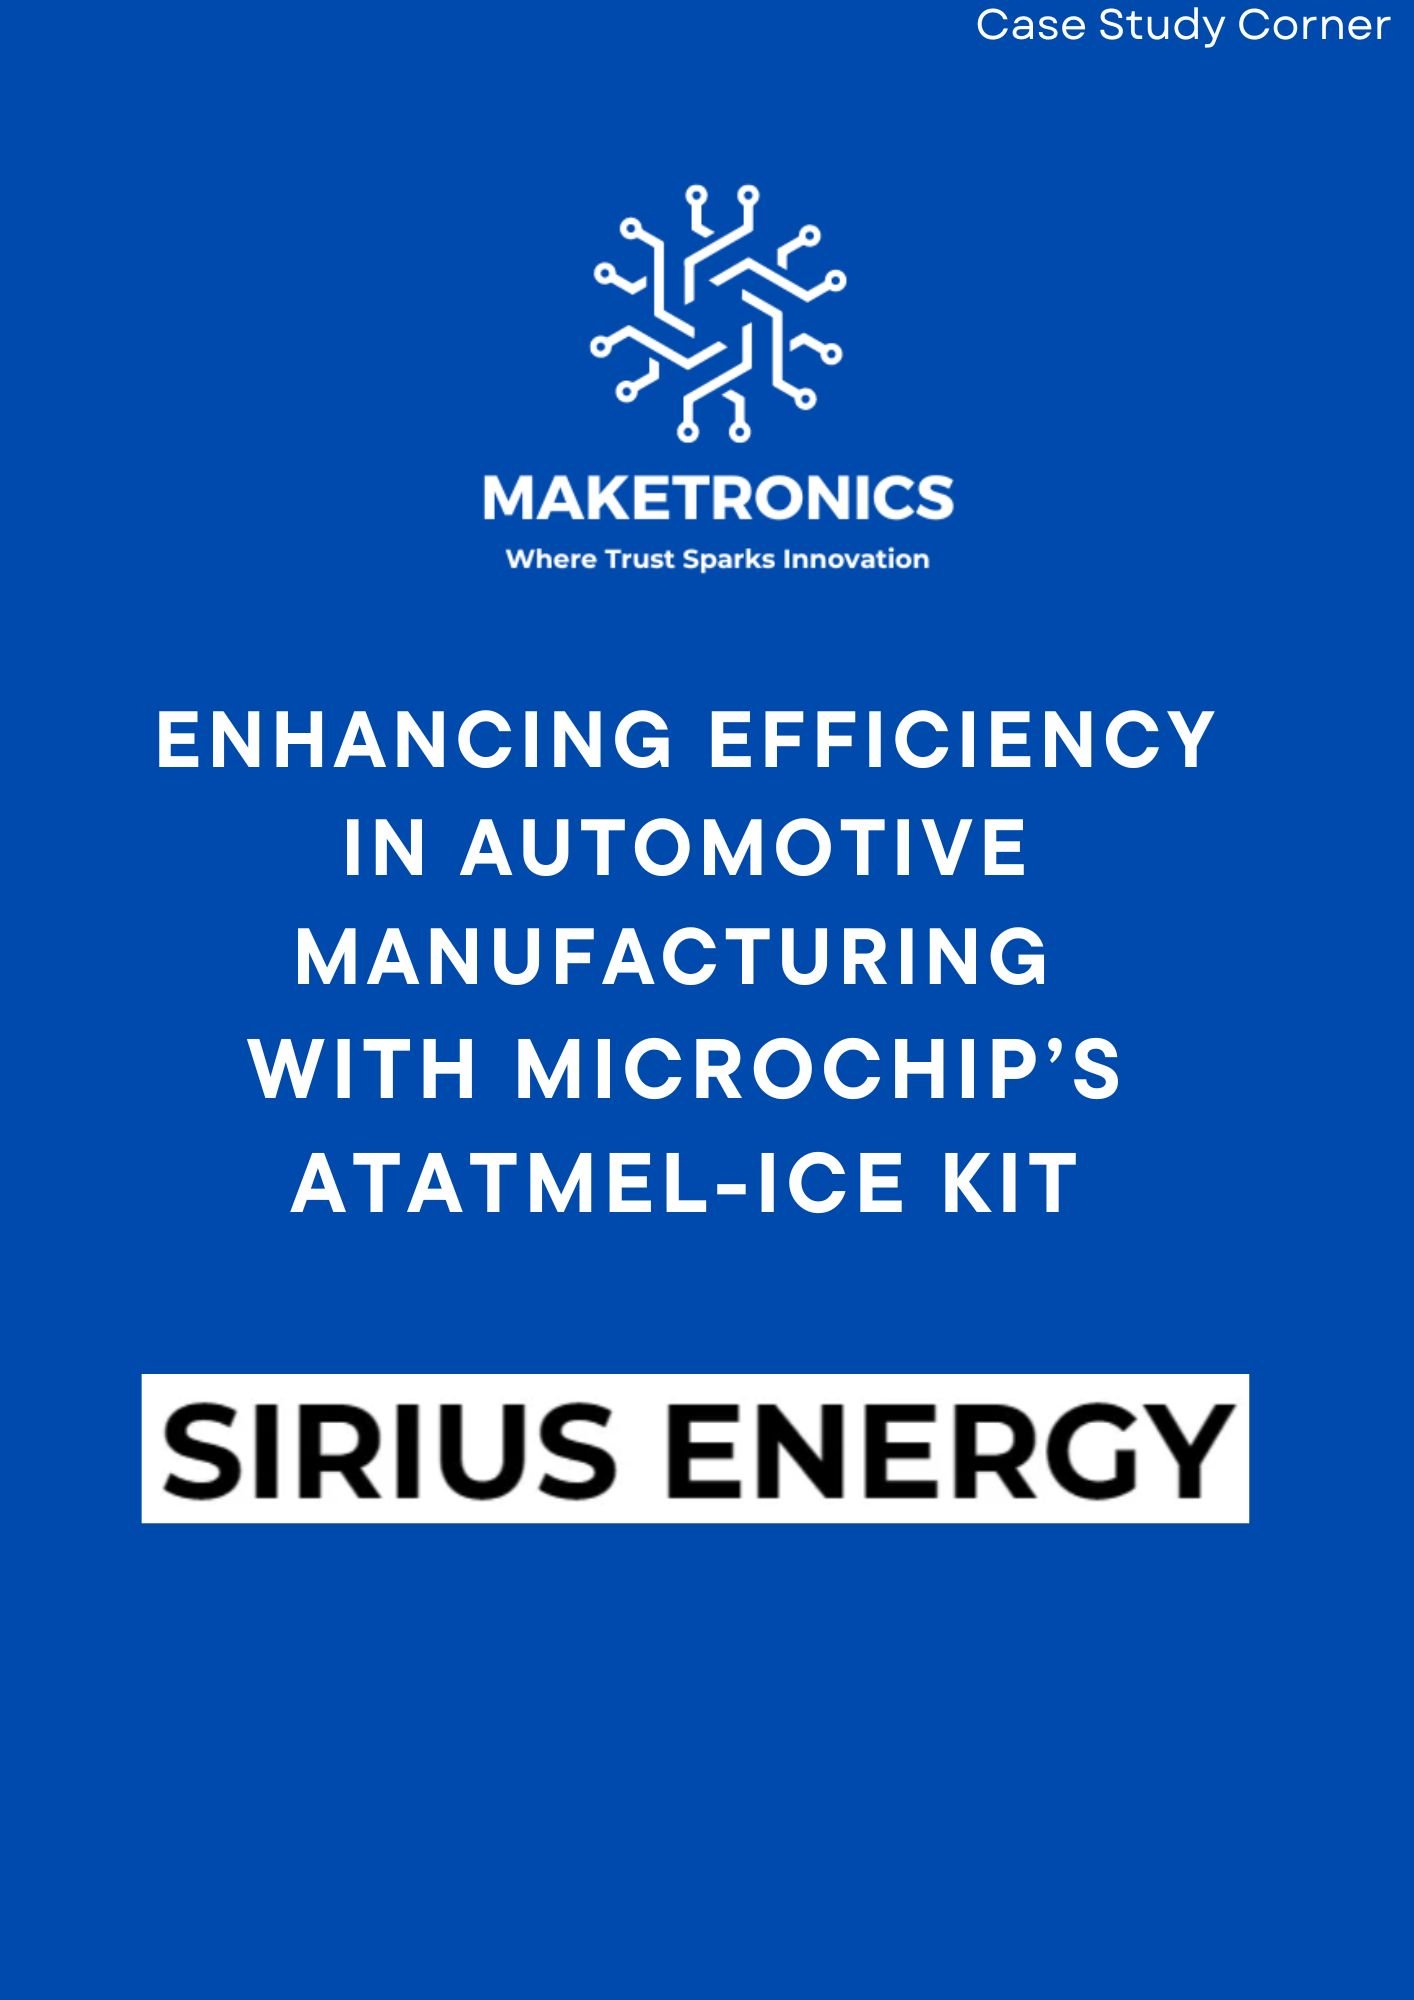 Enhancing Efficiency in Automotive Manufacturing with Microchip’s ATATMEL-ICE Kit